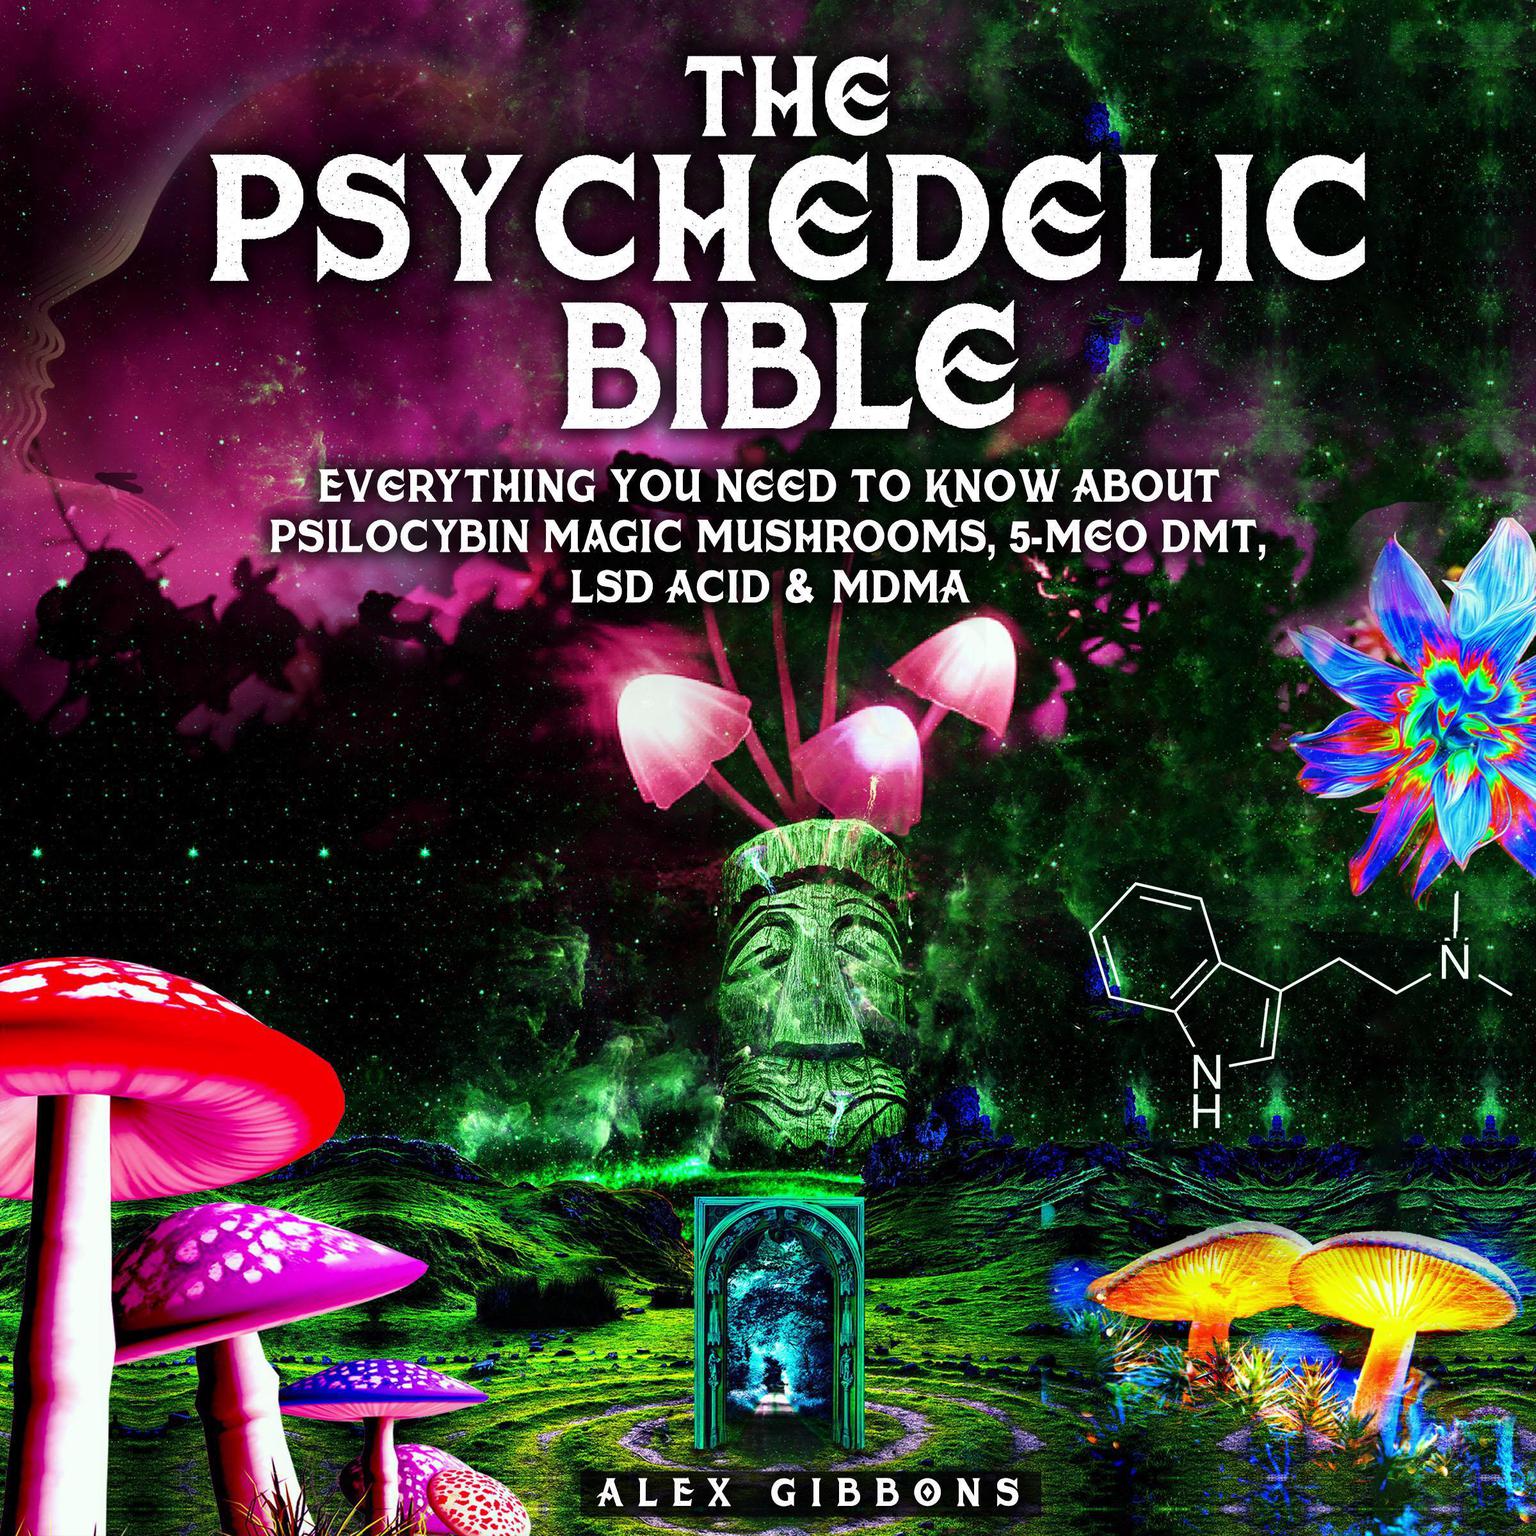 The Psychedelic Bible - Everything You Need To Know About Psilocybin Magic Mushrooms, 5-Meo DMT, LSD/Acid & MDMA Audiobook, by Alex Gibbons